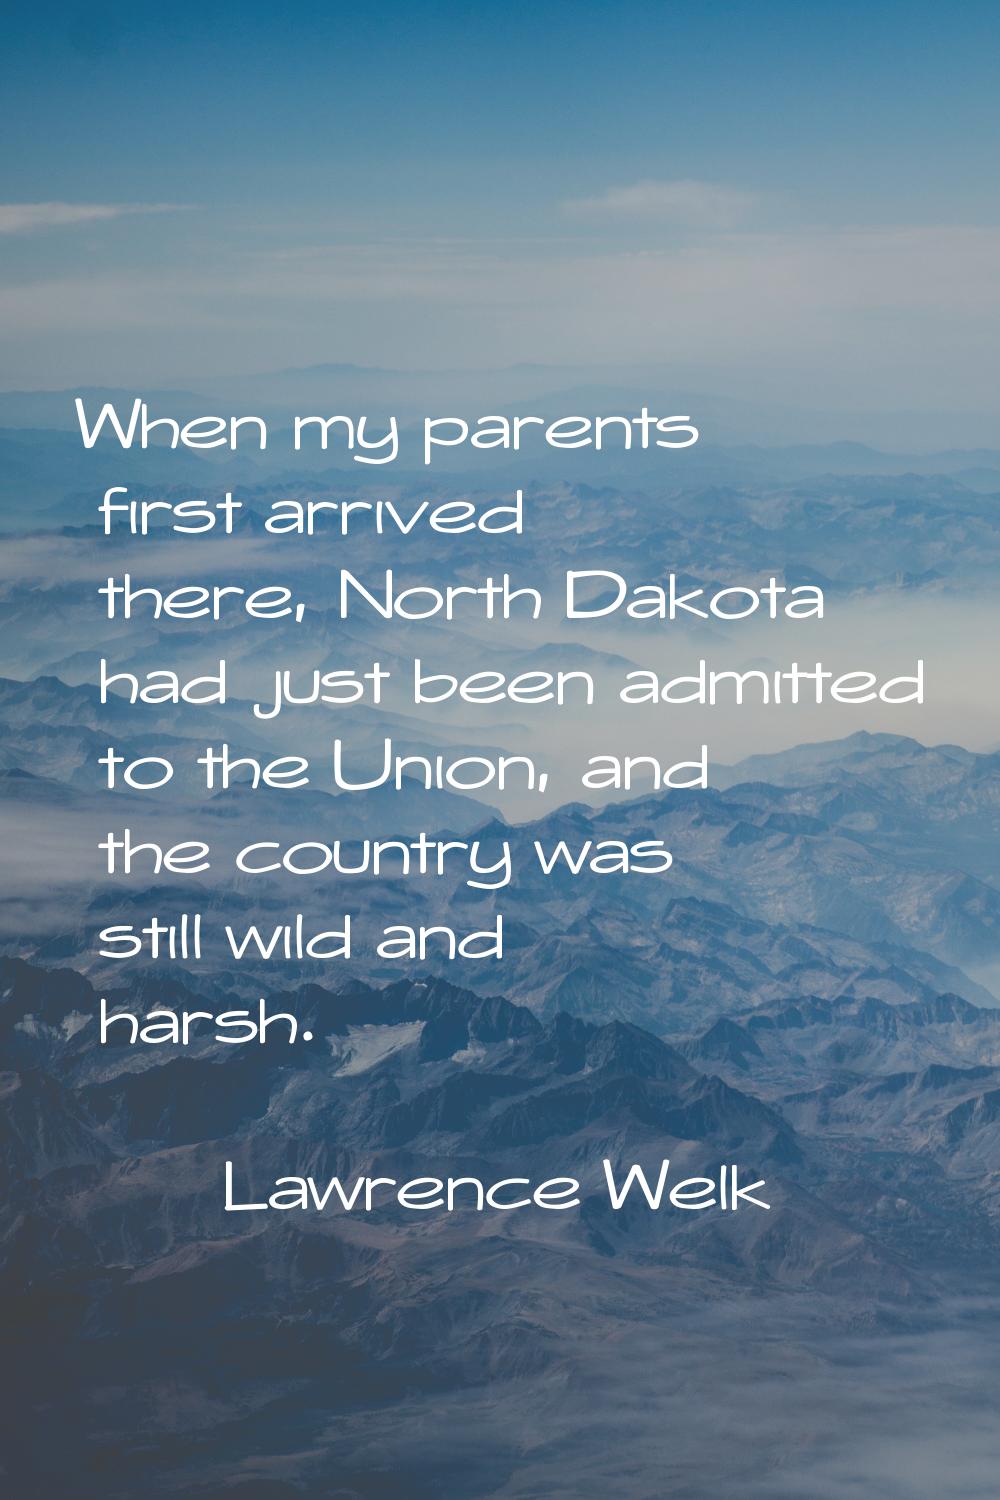 When my parents first arrived there, North Dakota had just been admitted to the Union, and the coun